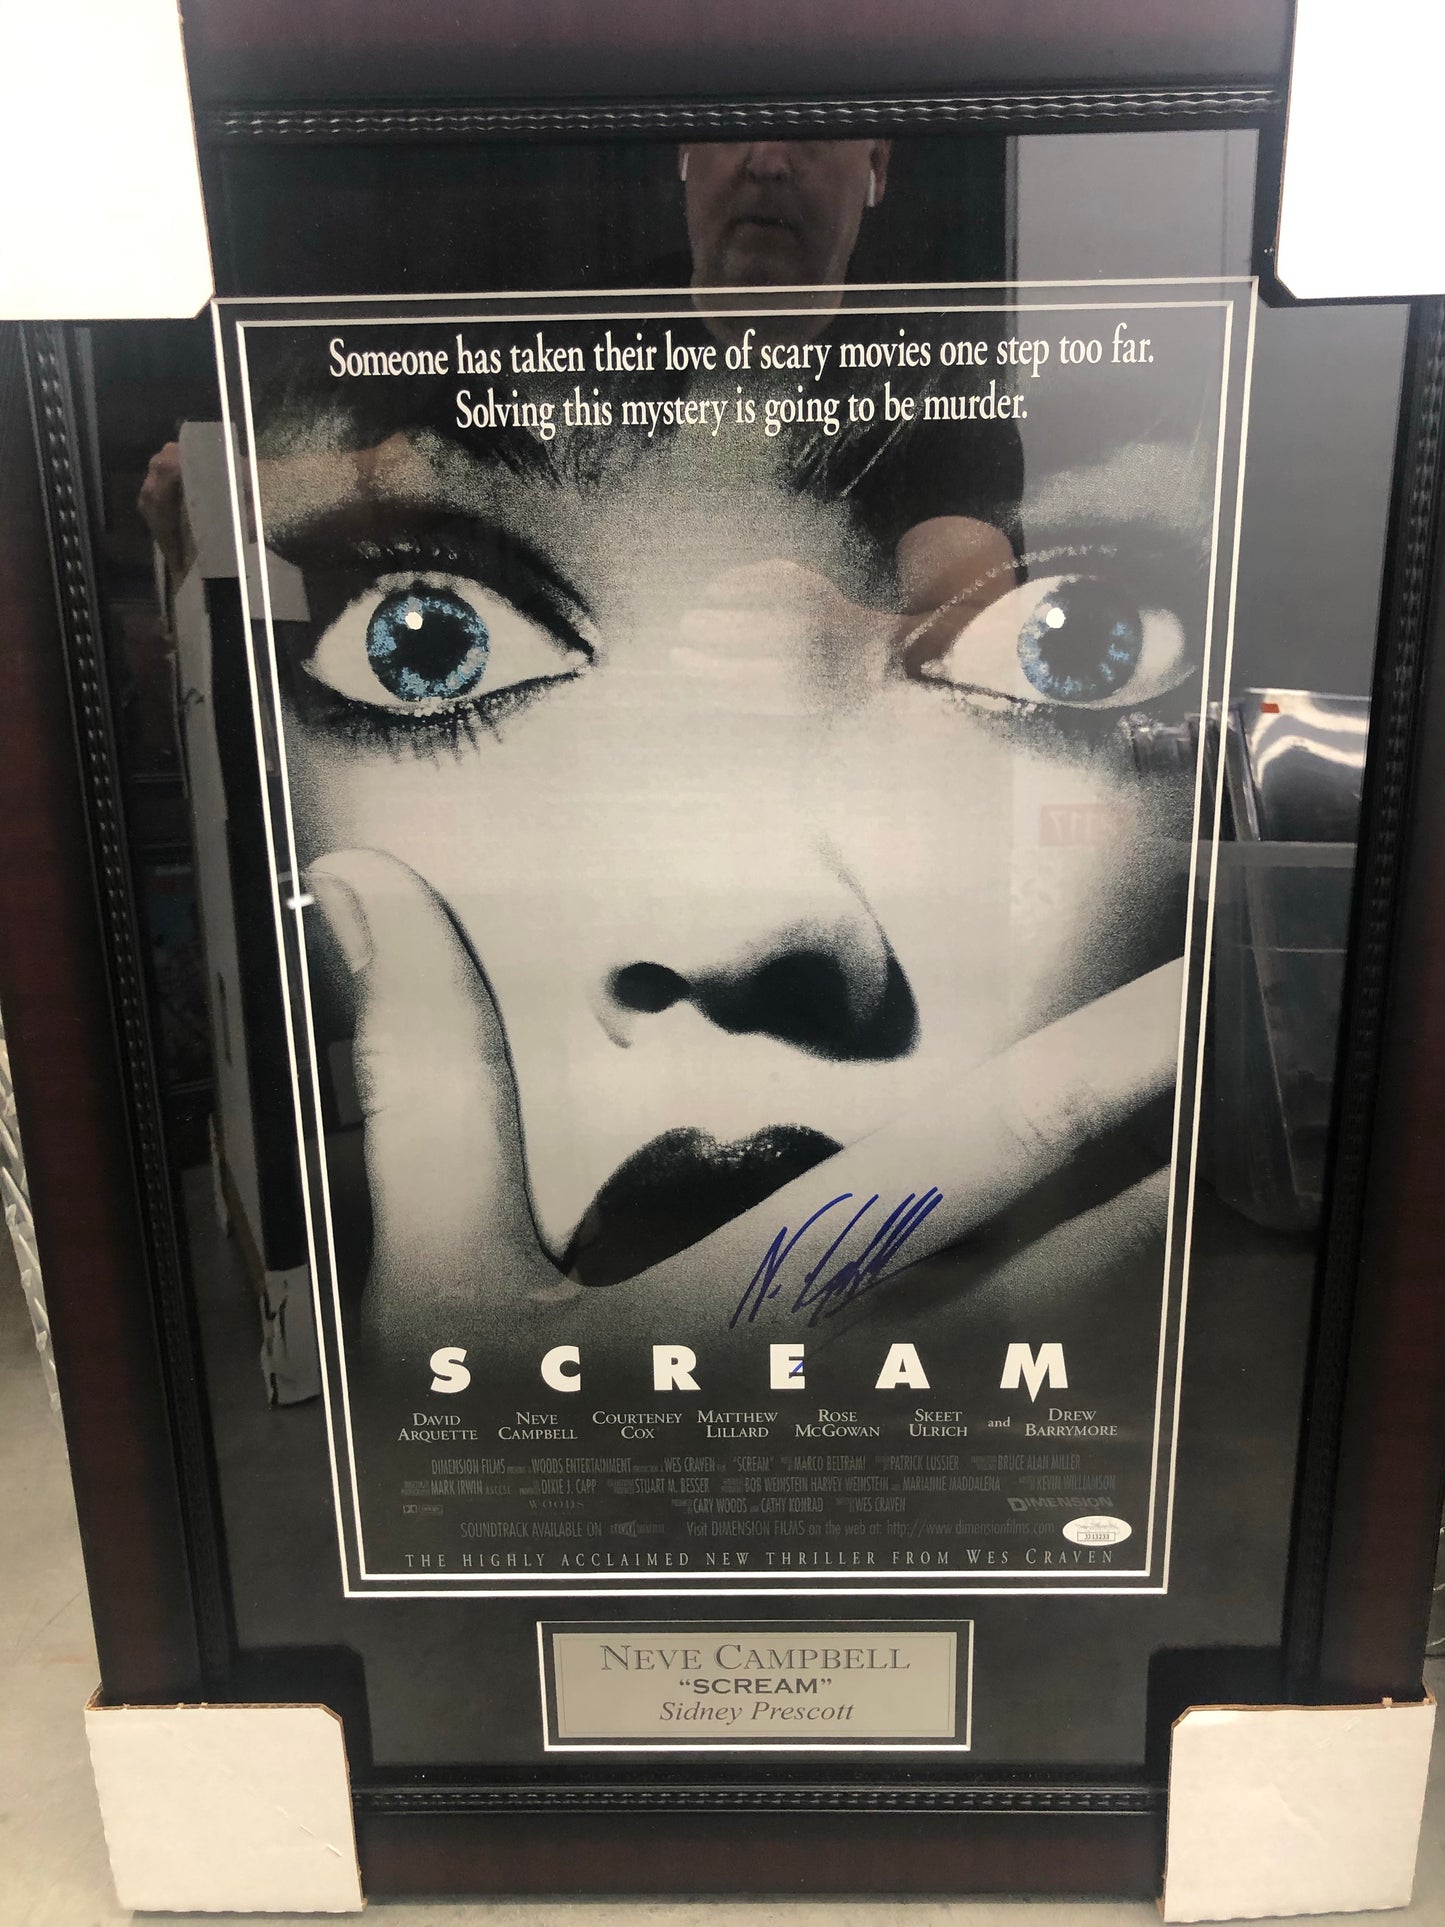 Neve Campbell signed and framed 11x17 SCREAM movie poster with JSA certification